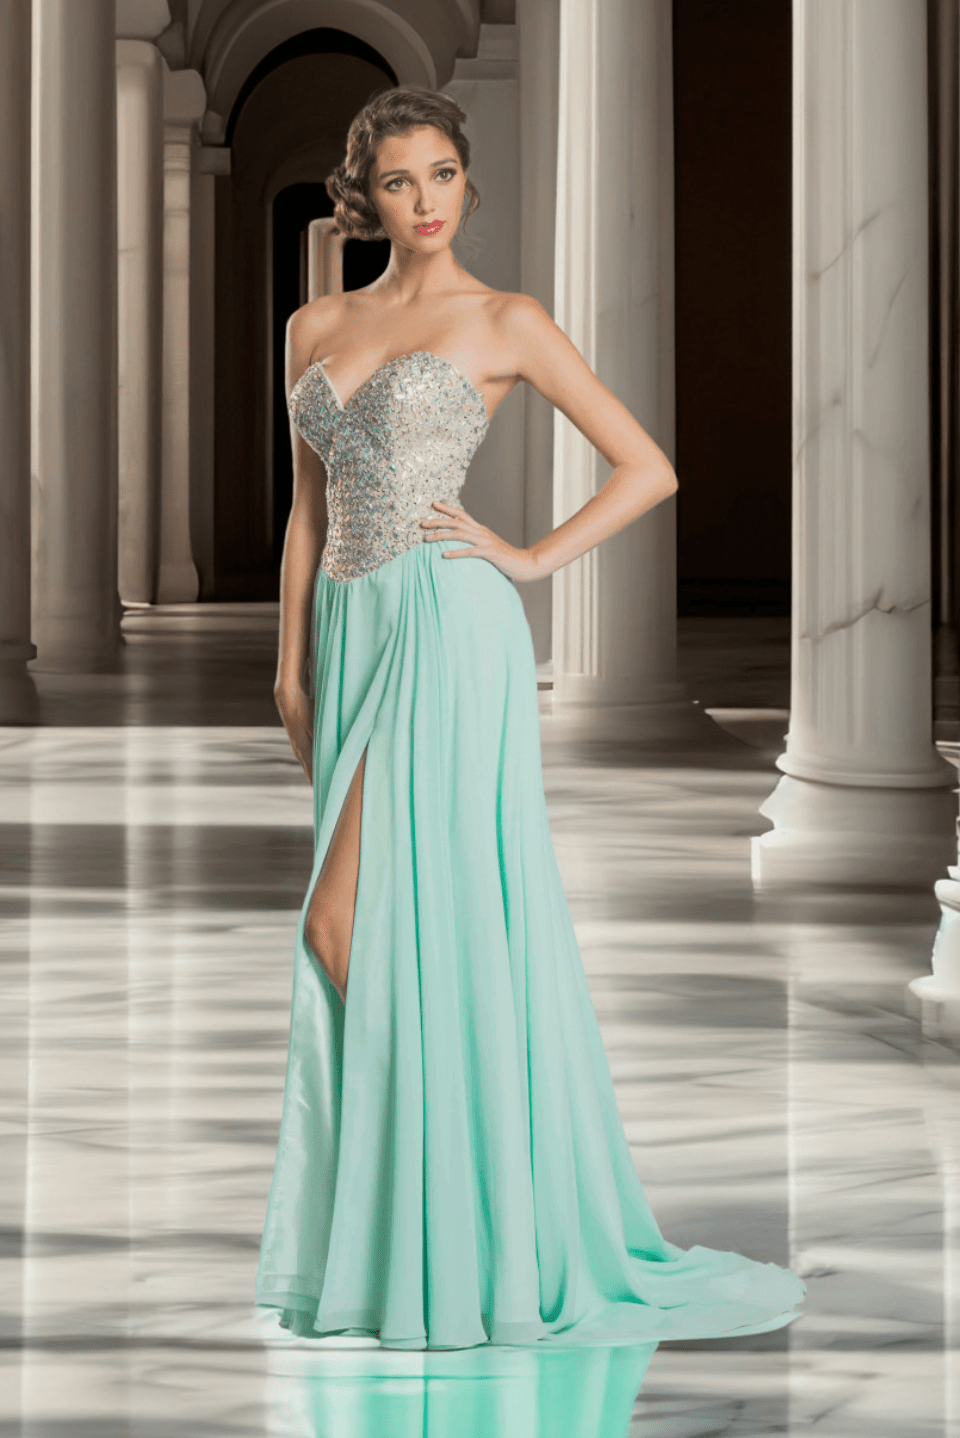 Sparkling Strapless Leg Slit Dress by Aspeed - NORMA REED